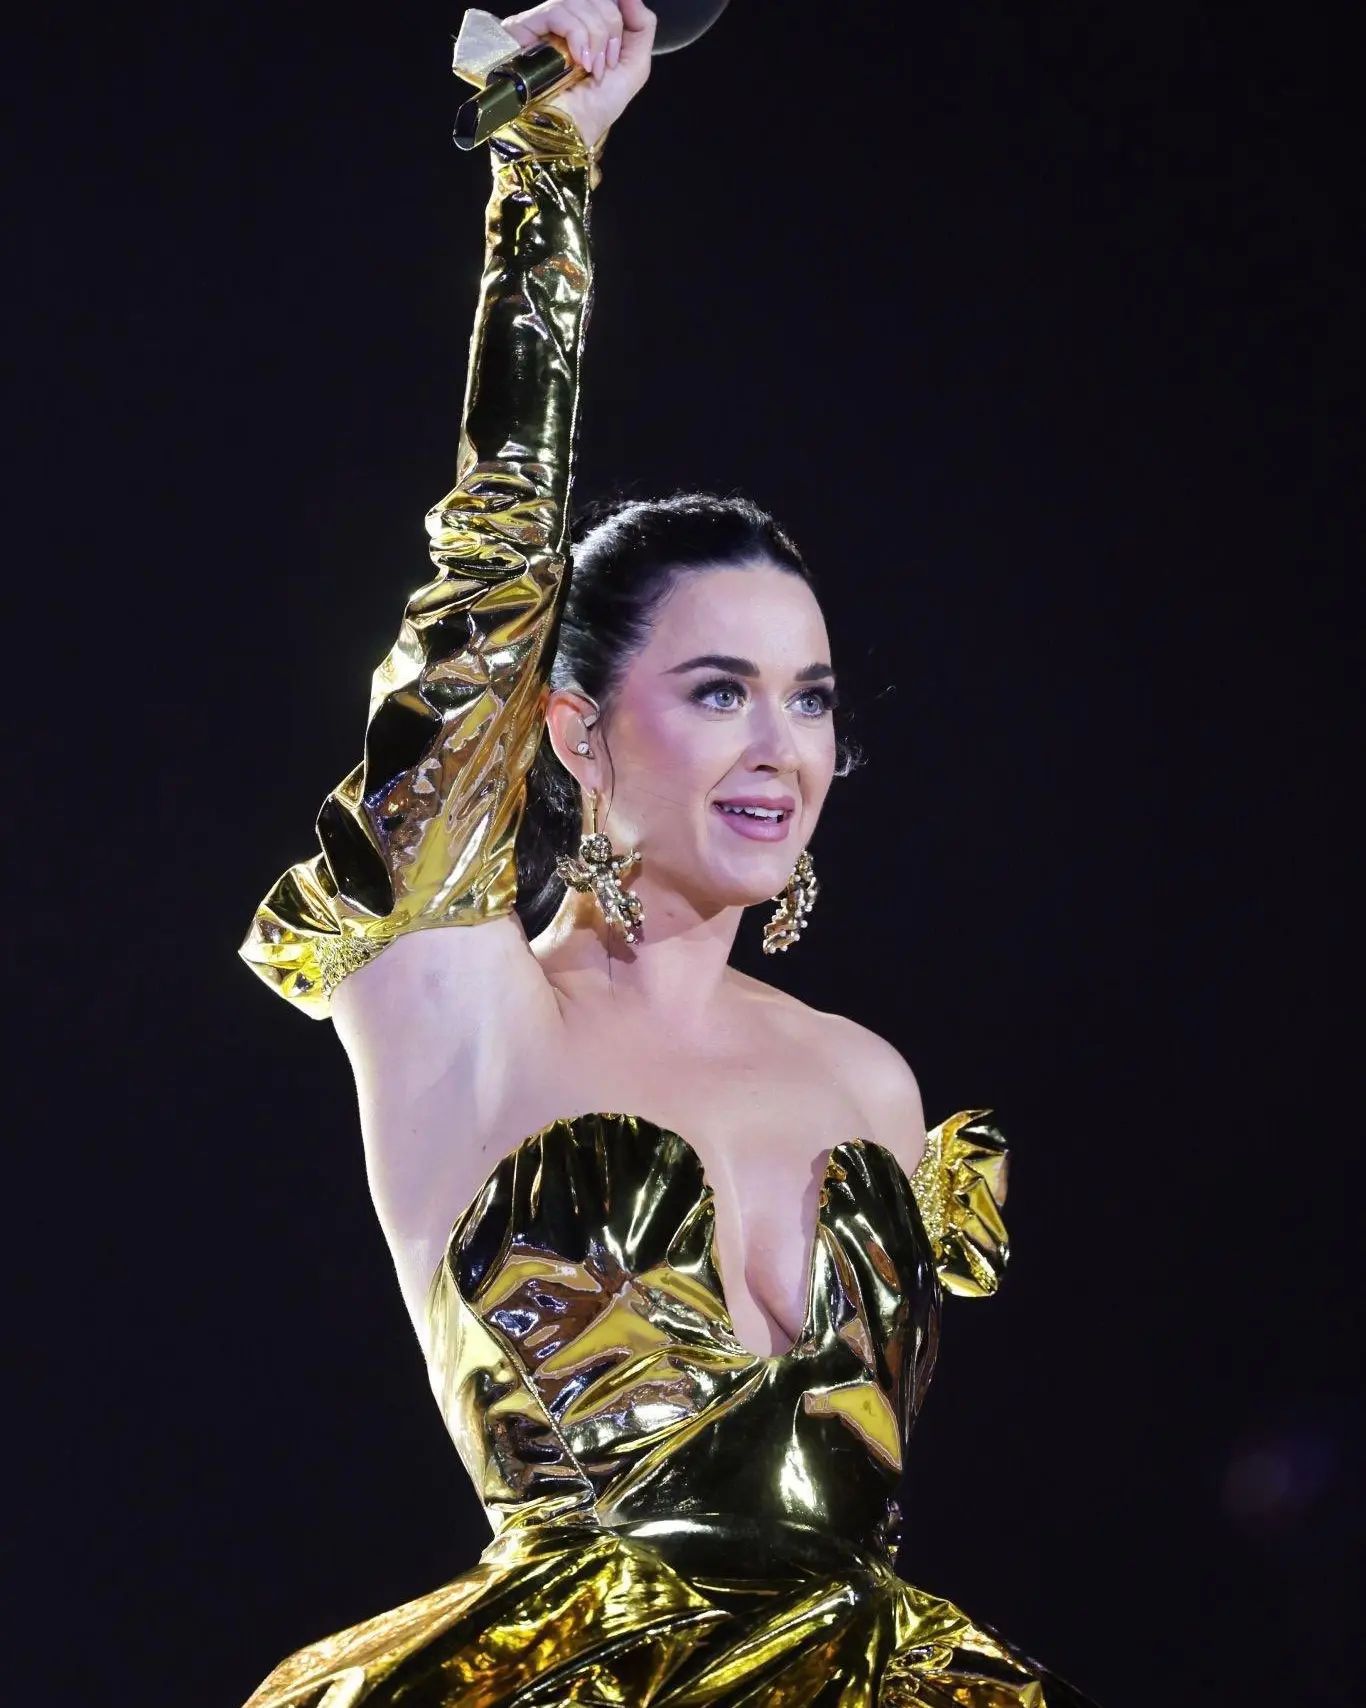 Katy Perry at King Charles 3 coronation event